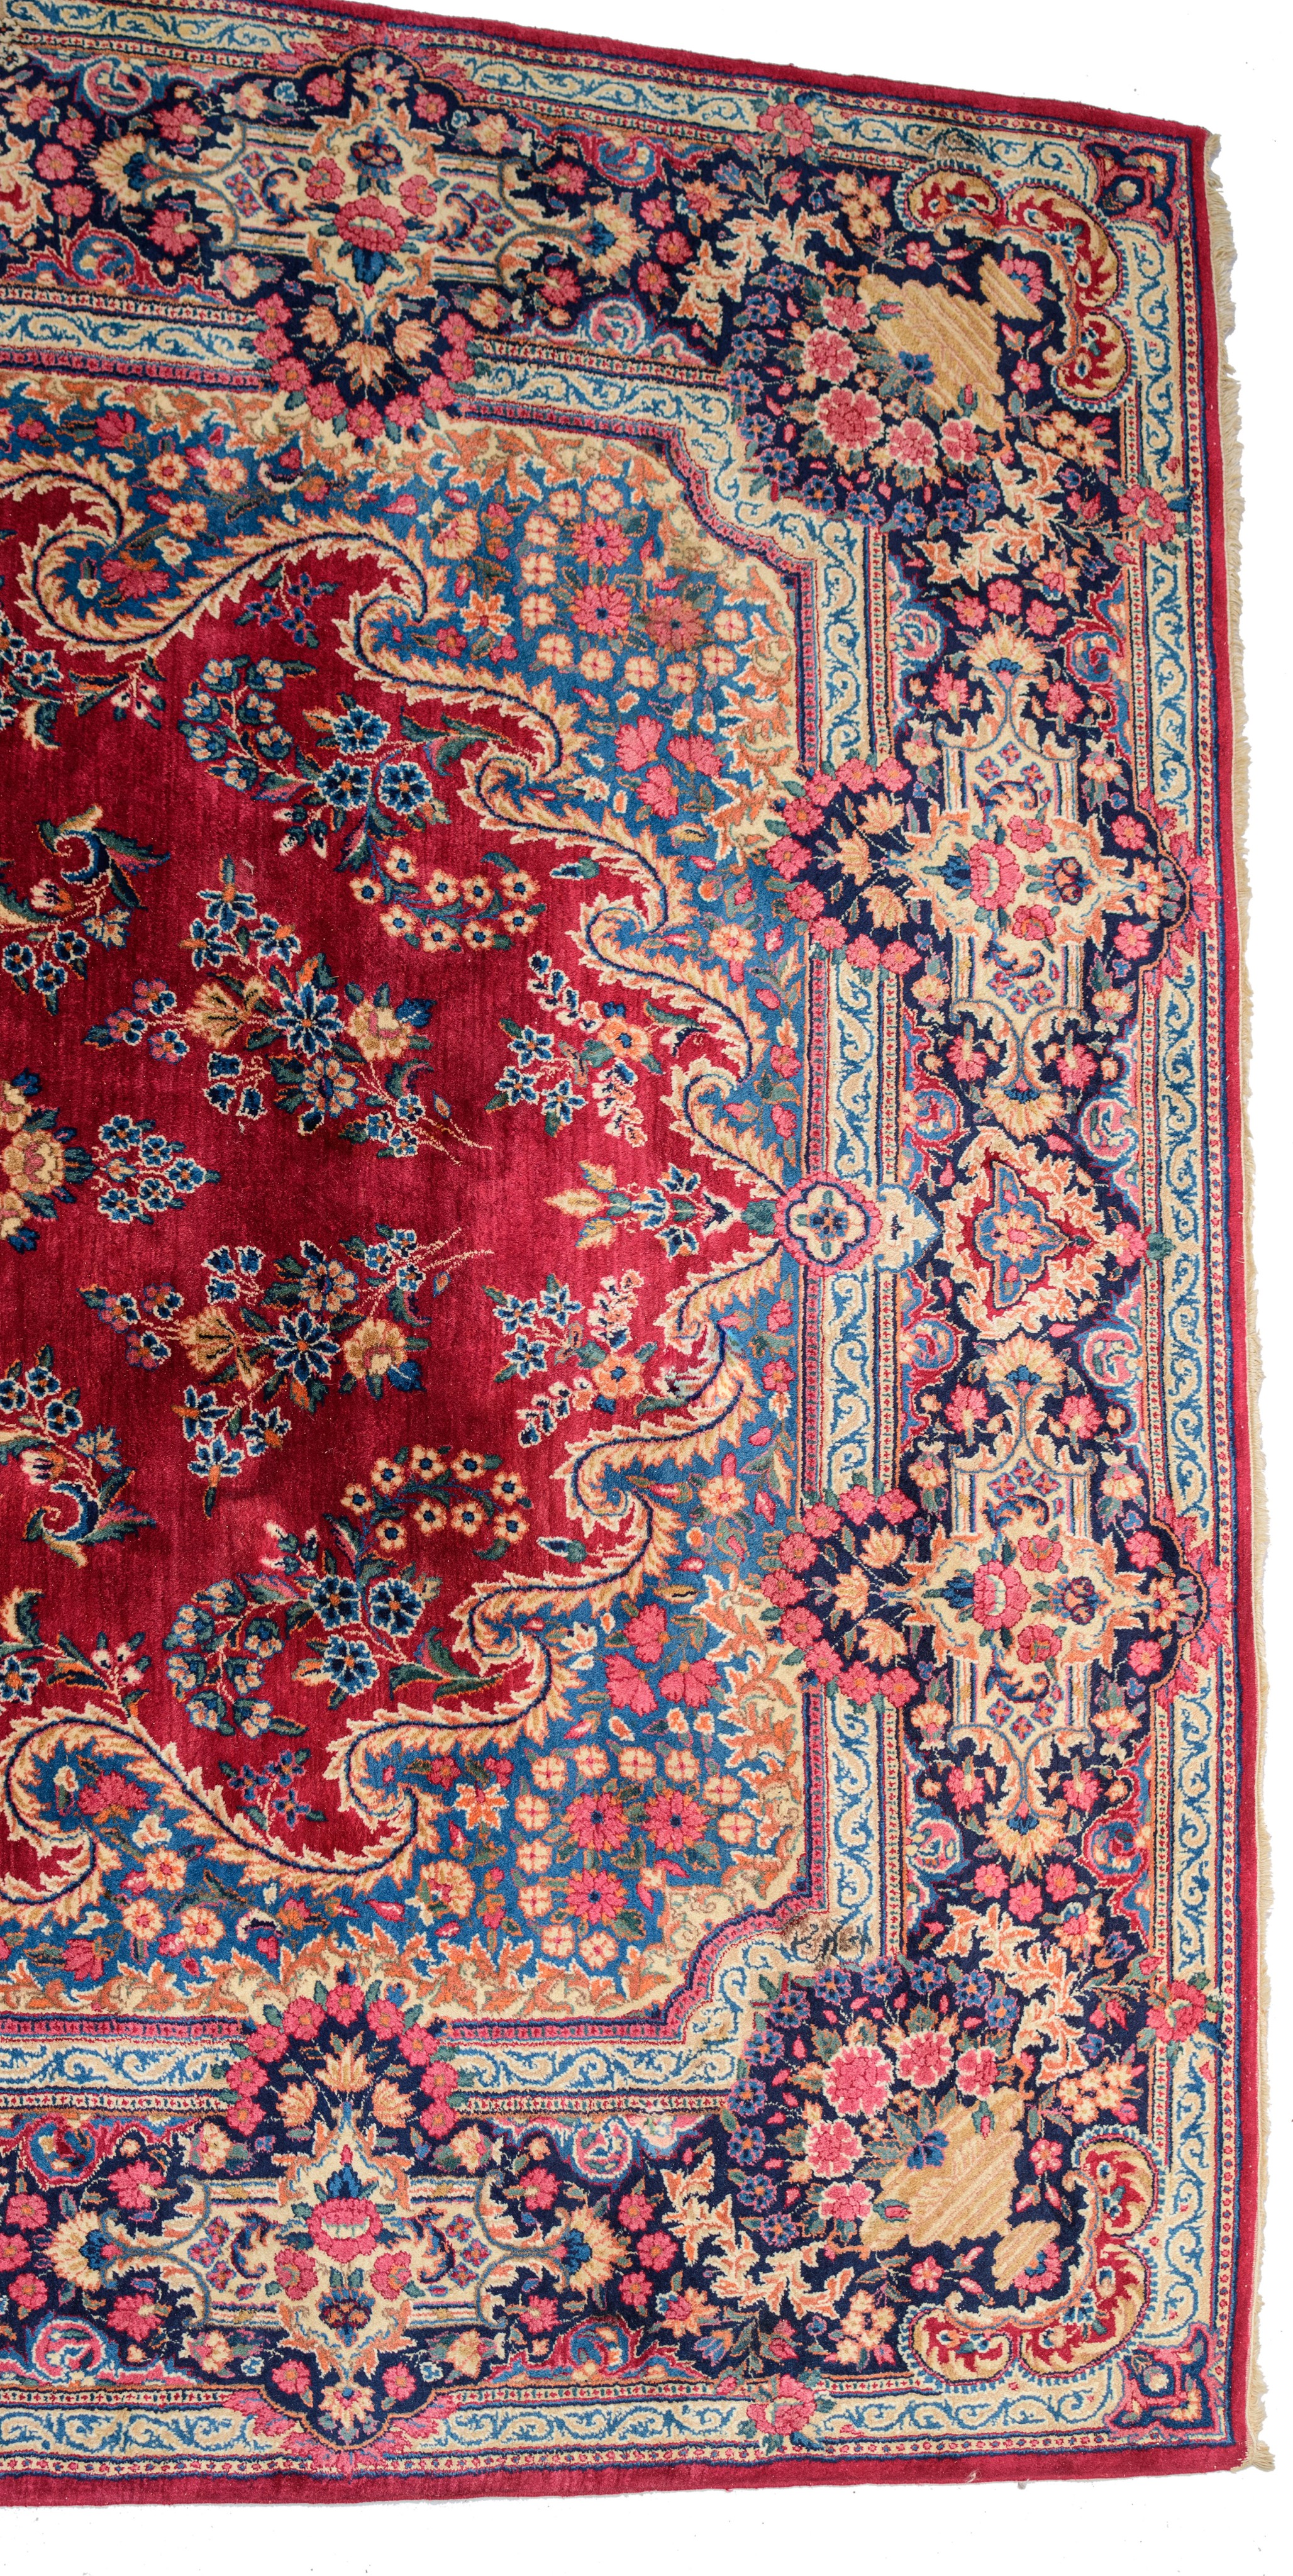 A large Oriental woollen rug, floral decorated, signed, 360 x 260 cm - Image 9 of 9